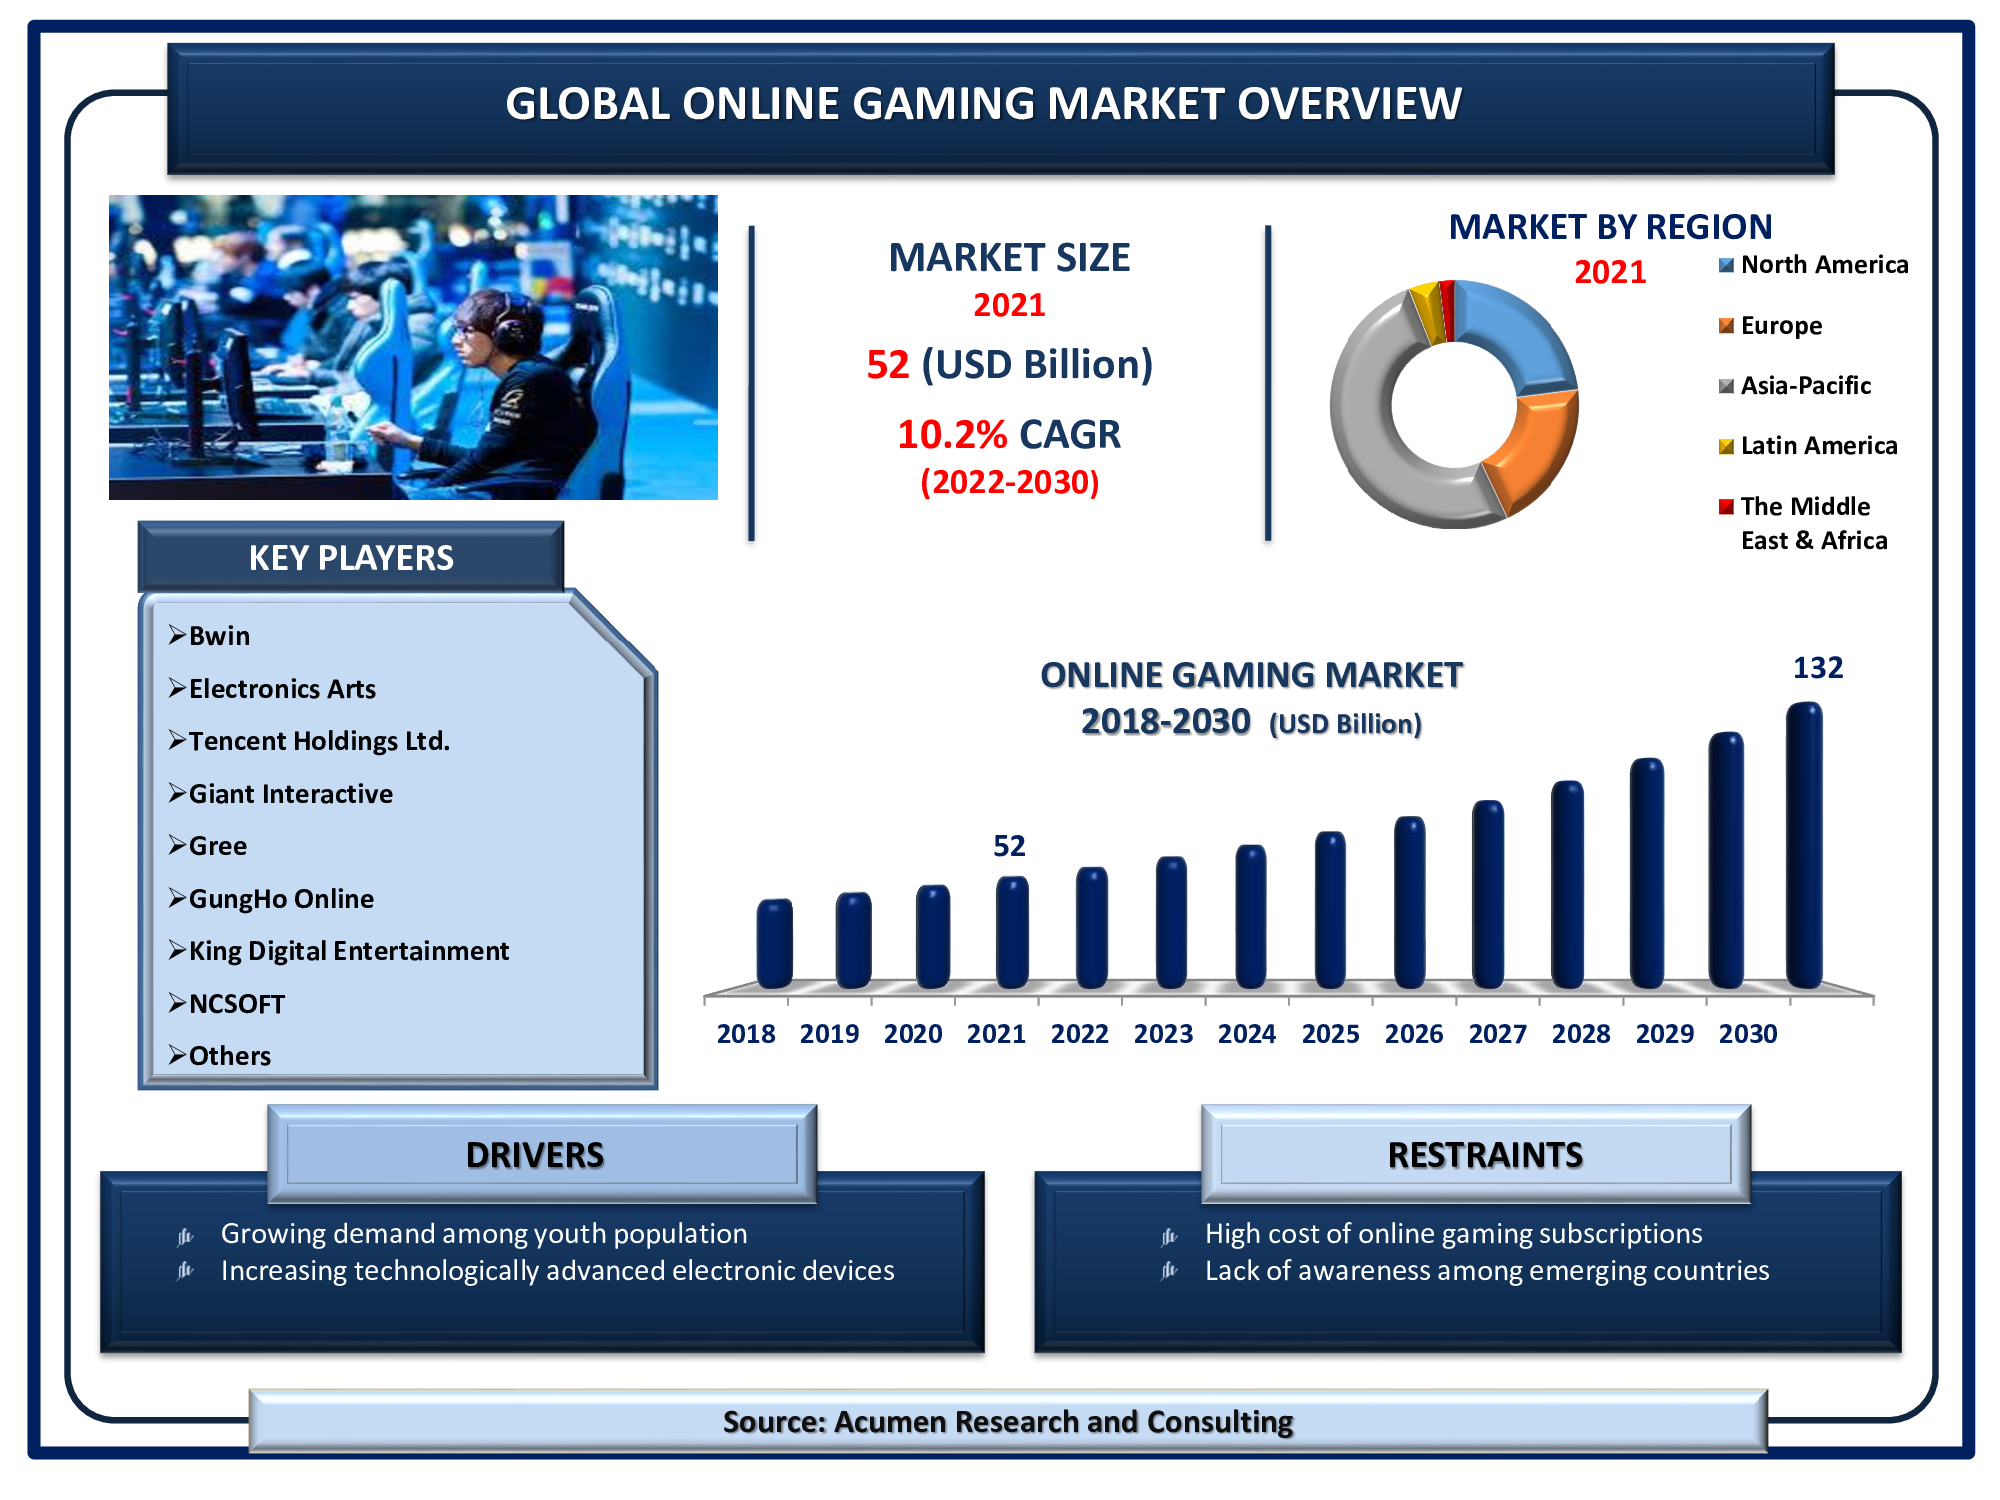 Online Gaming Market will achieve a market size of USD 132 Billion by 2030, budding at a CAGR of 10.2%